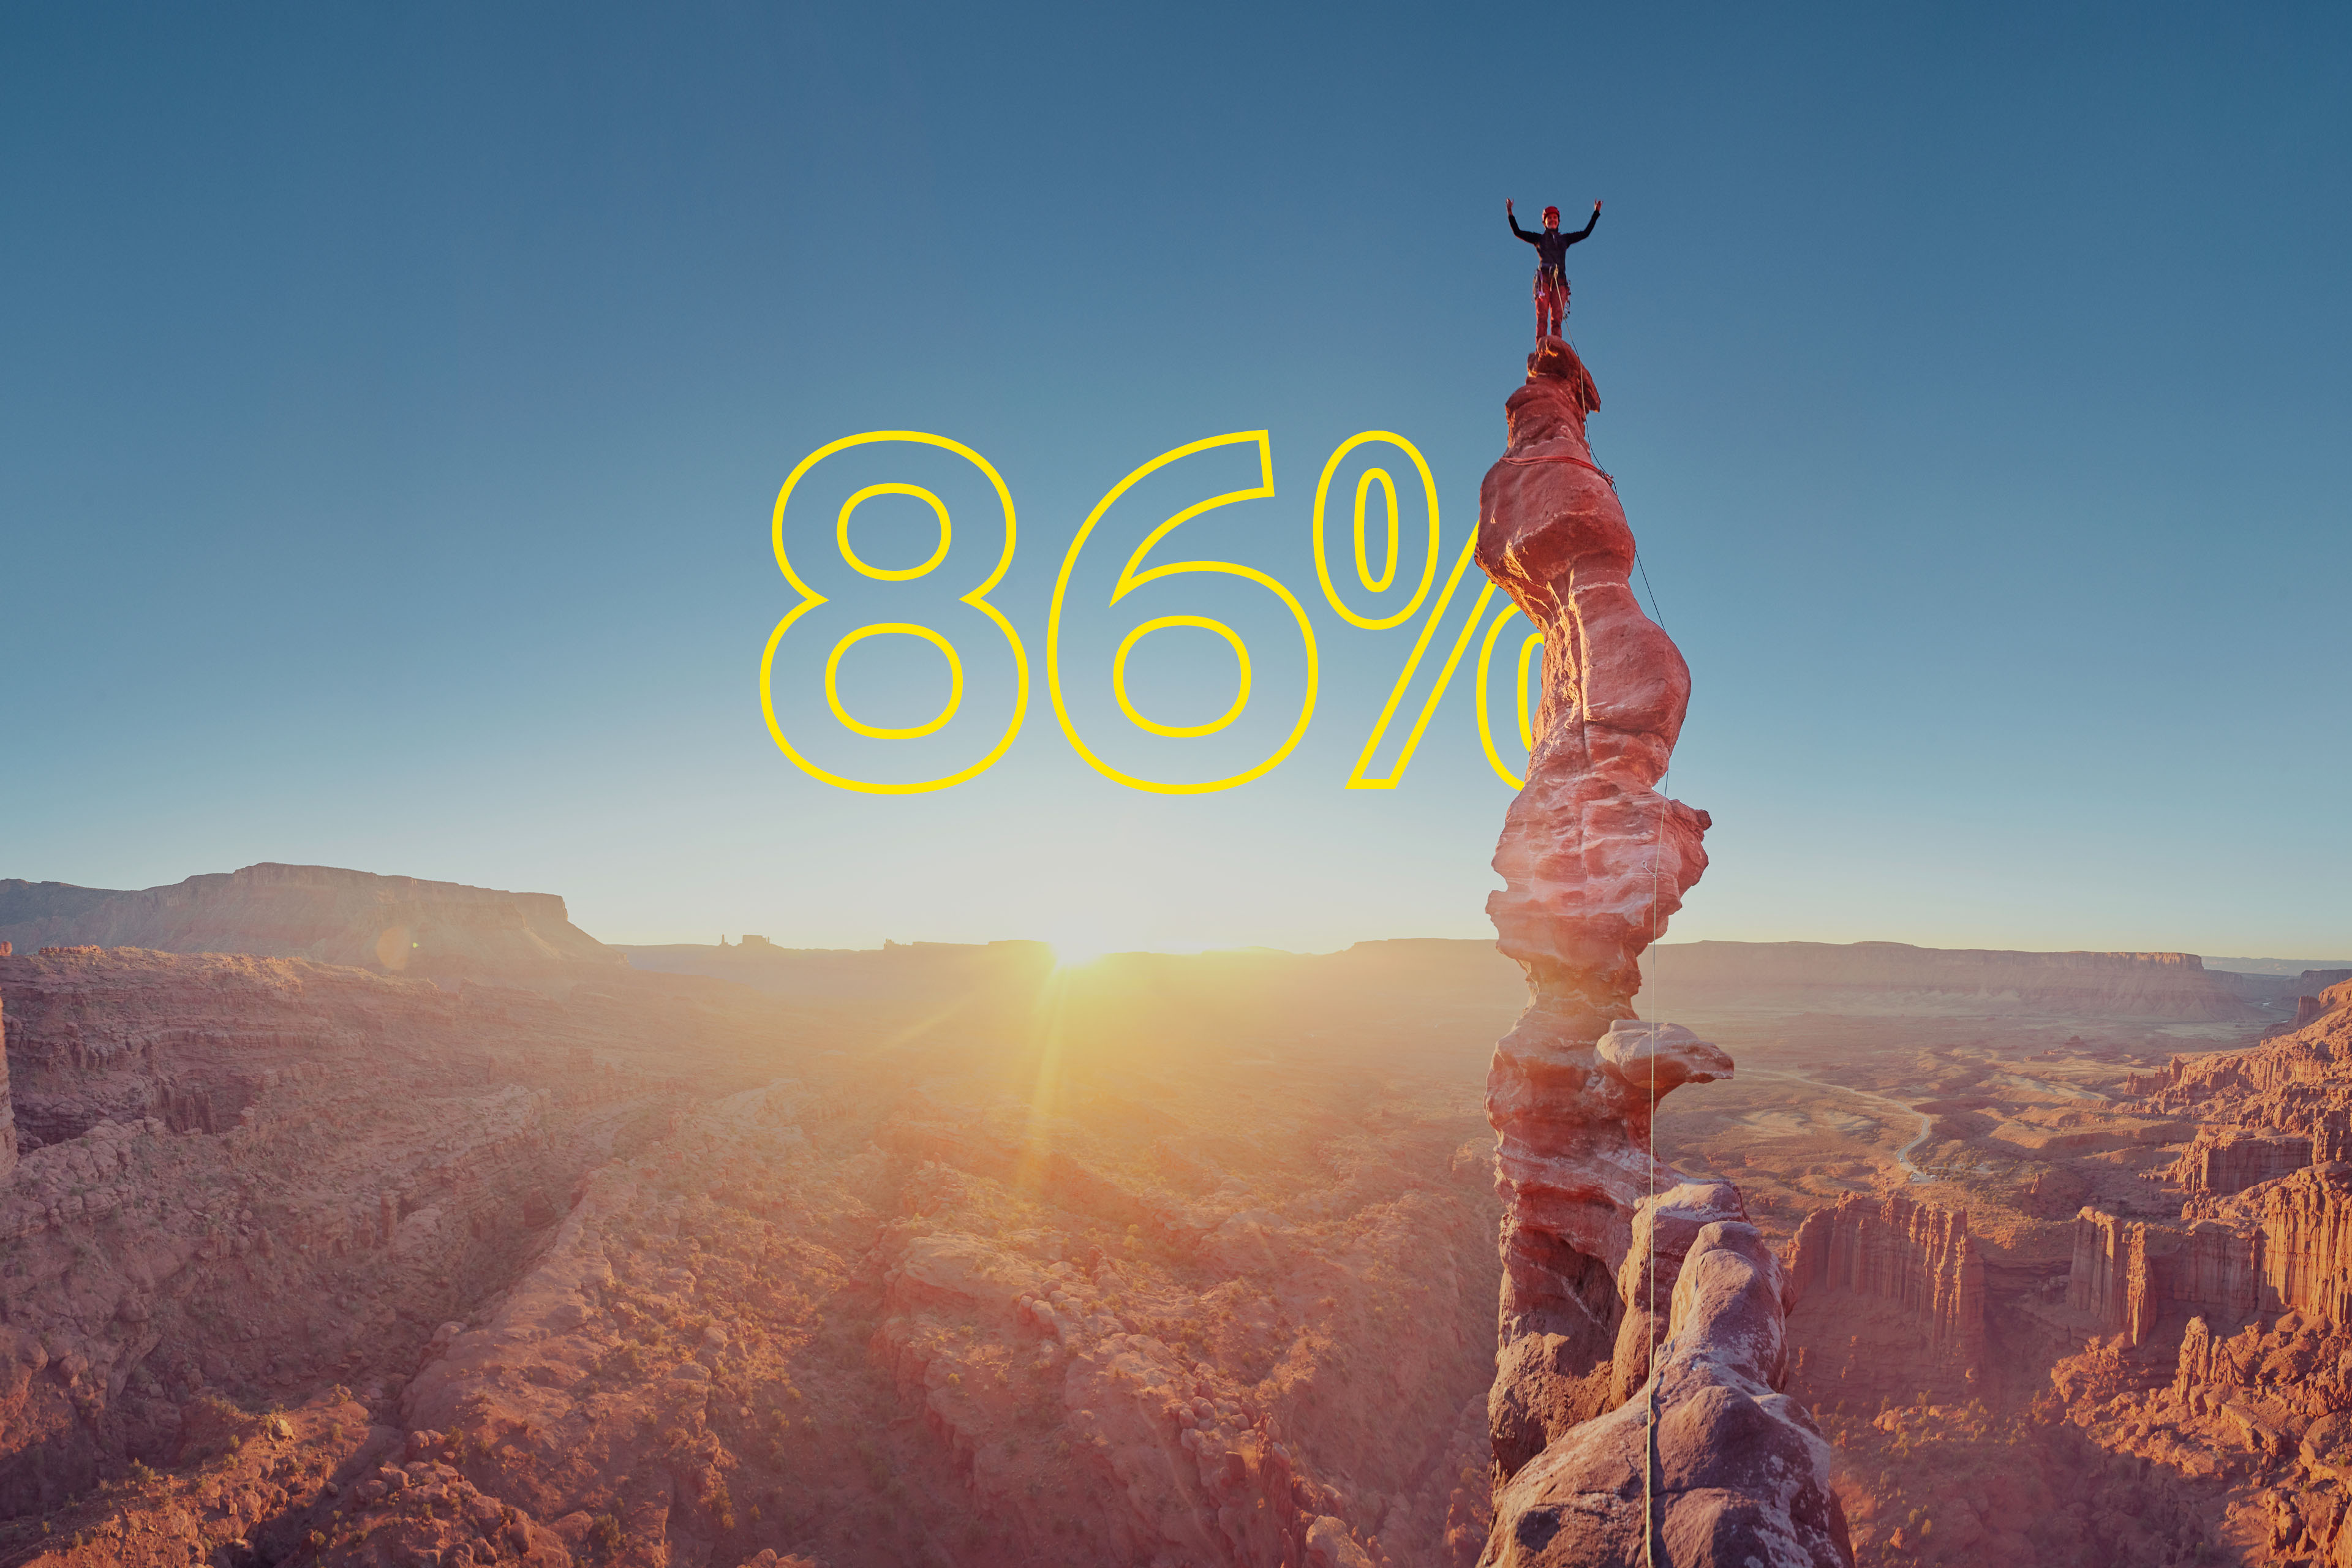 Rock climber celebrating on top of summit of climb at sunset in Moab, USA – overlaid is yellow text saying 86%